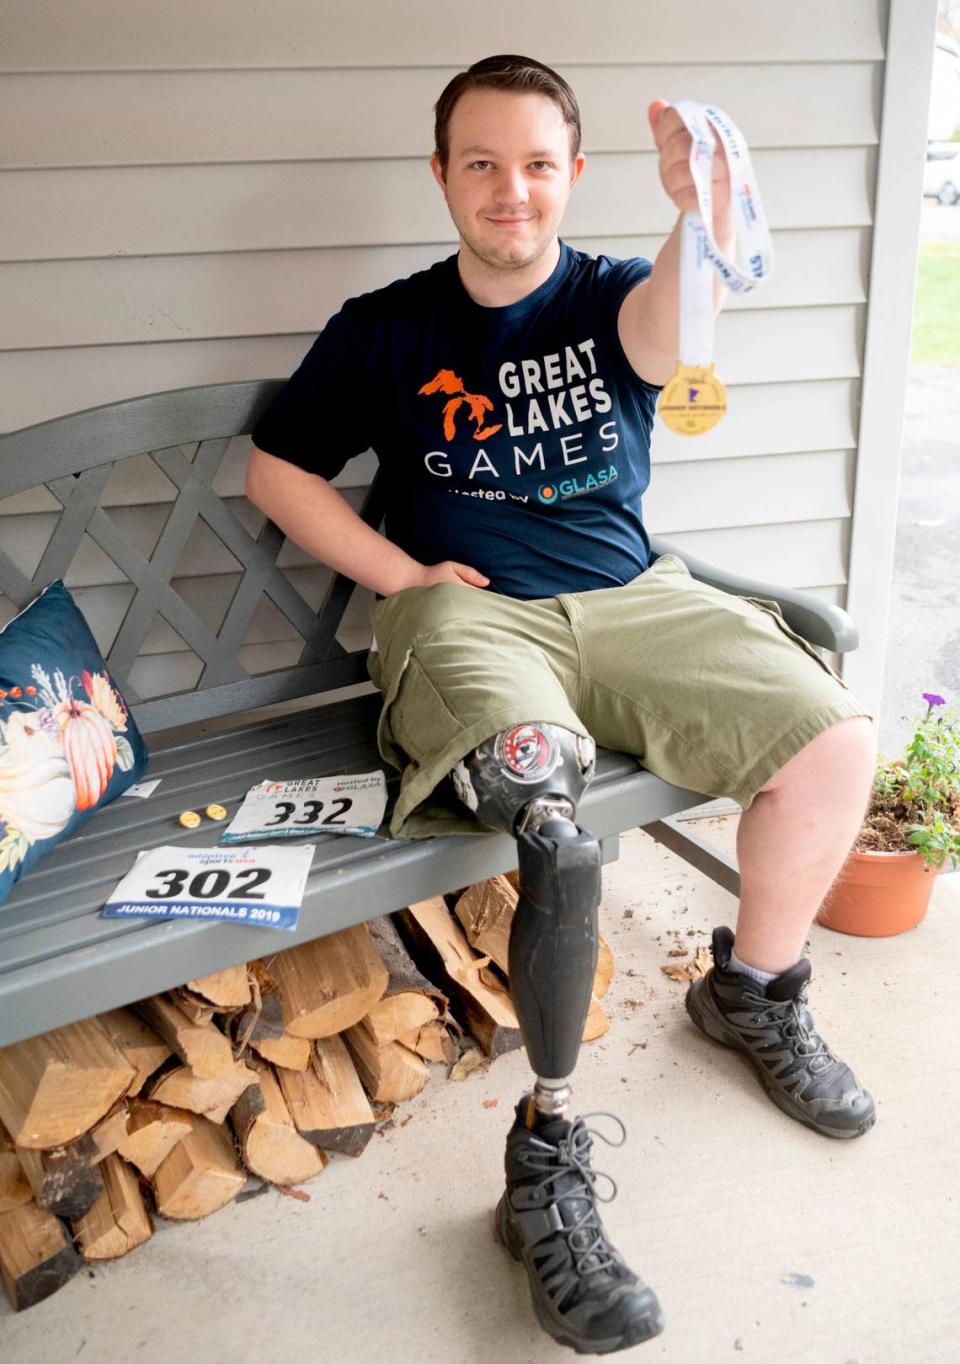 RJ Shirey holds up his gold medal from the adaptive sports junior nationals in 2019. Shirey wants to continue competing through Penn State Ability Athletics, which has been on pause since the pandemic.